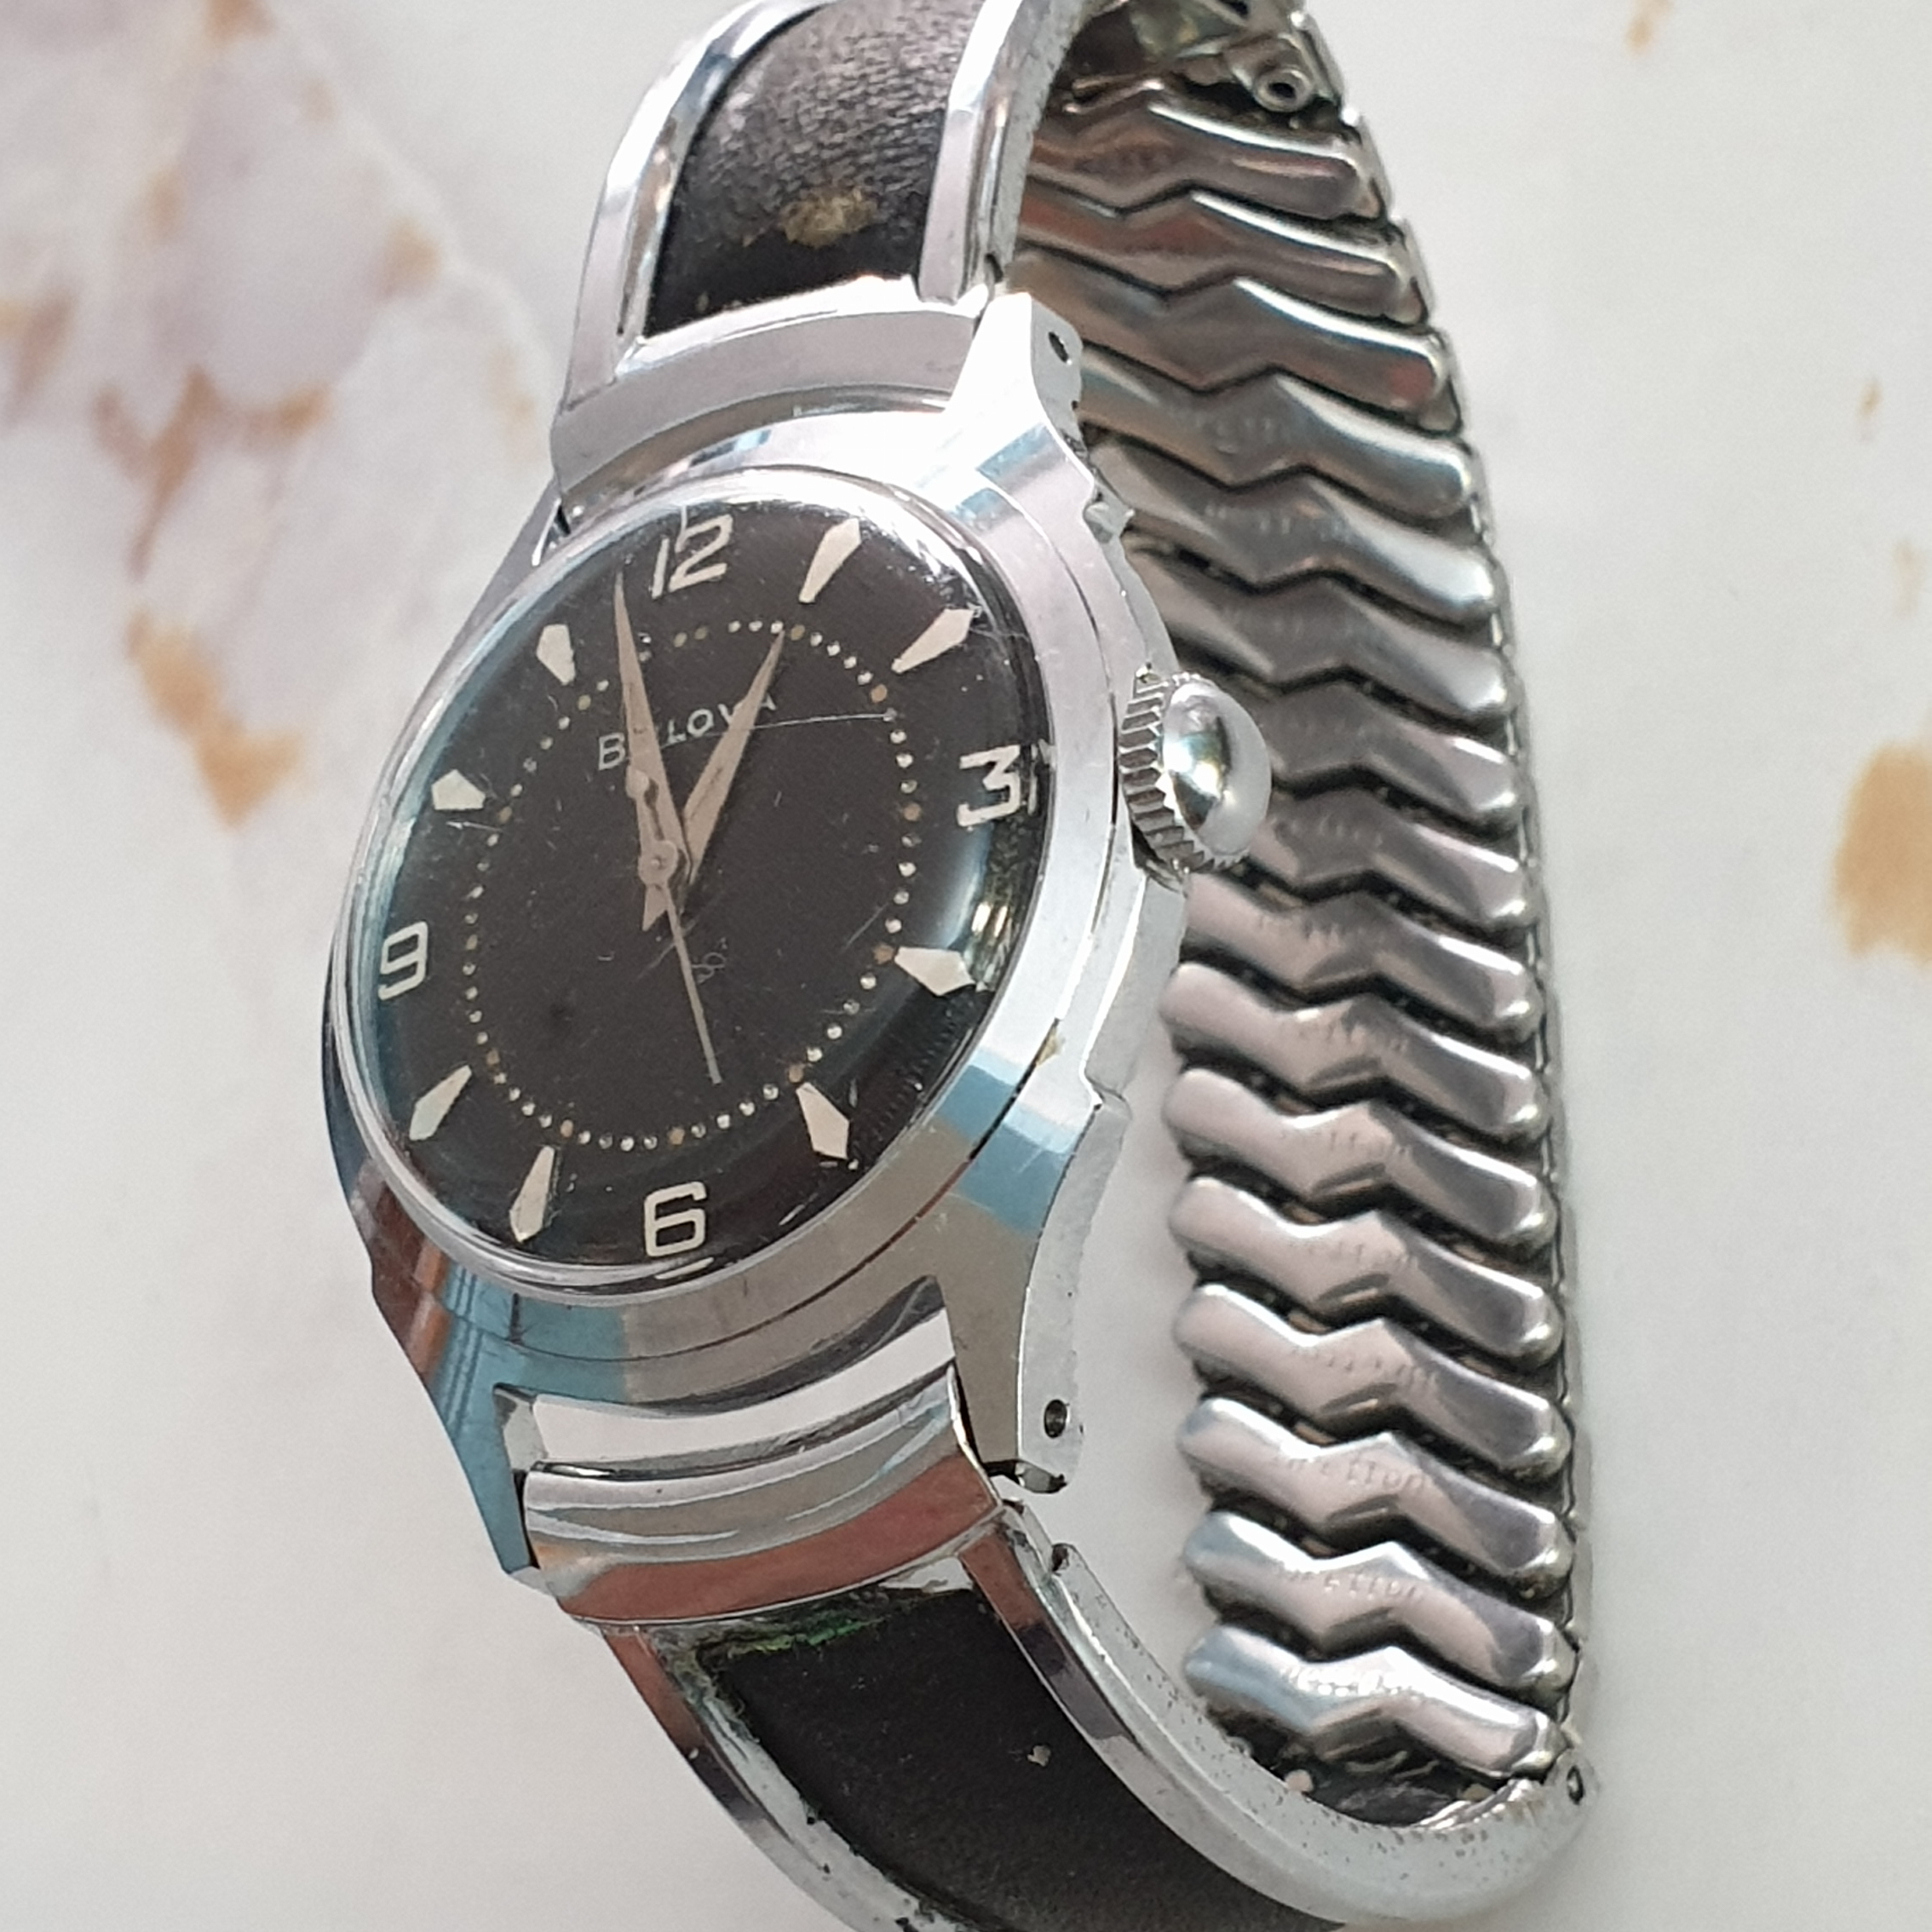 BULOVA MANUAL WIND WRISTWATCH WITH BLACK WAFFLE/HONEYCOMB DIAL IN CHROME PLATE CASE WITH ORIGINAL - Image 6 of 12